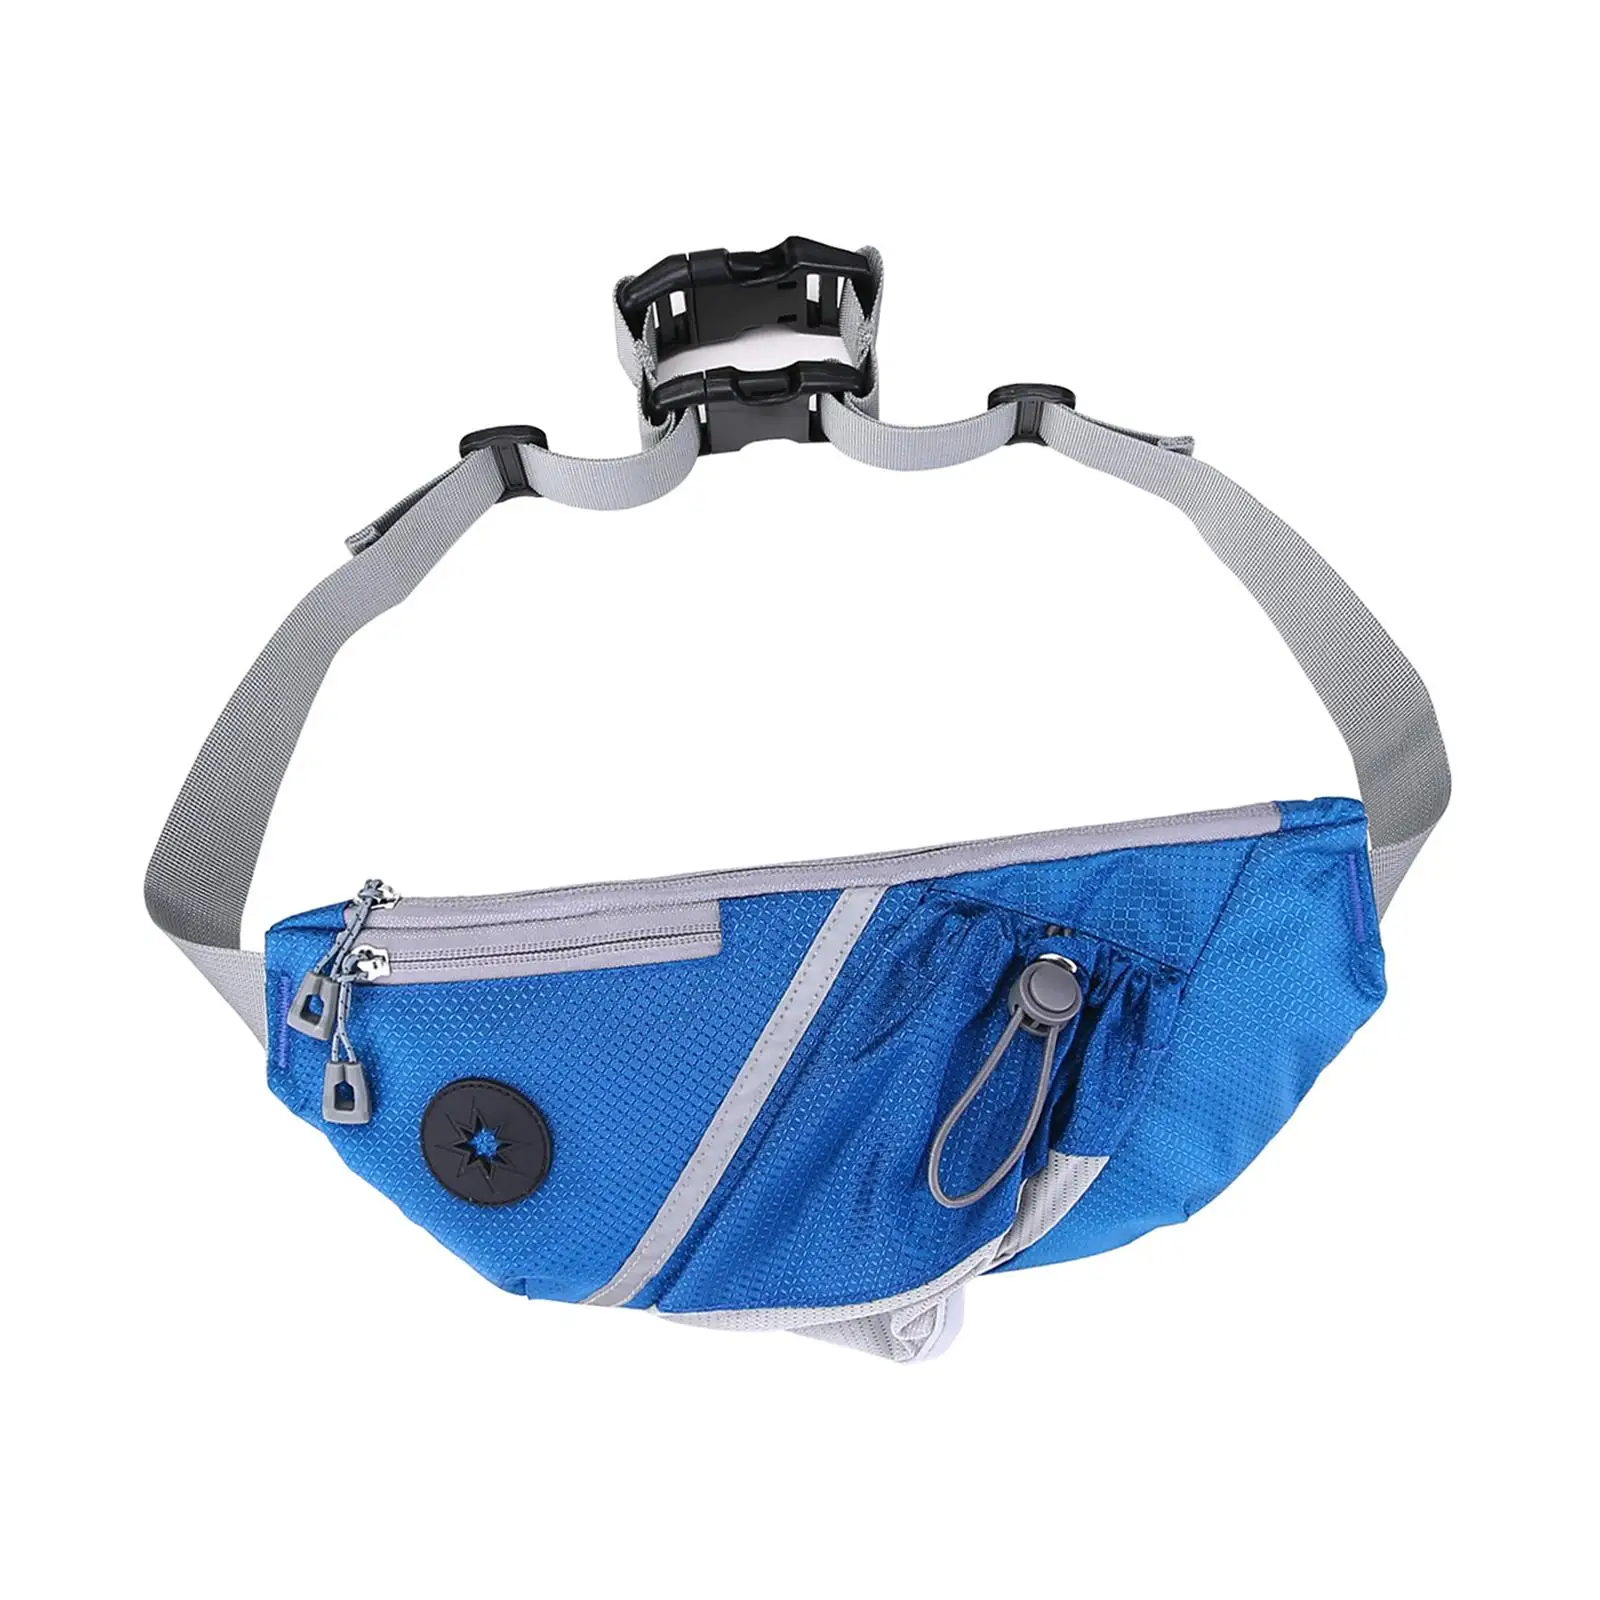 Running Dog Training Waist Bag Fanny Pack Puppy Treat Pouch Fit many Leashes